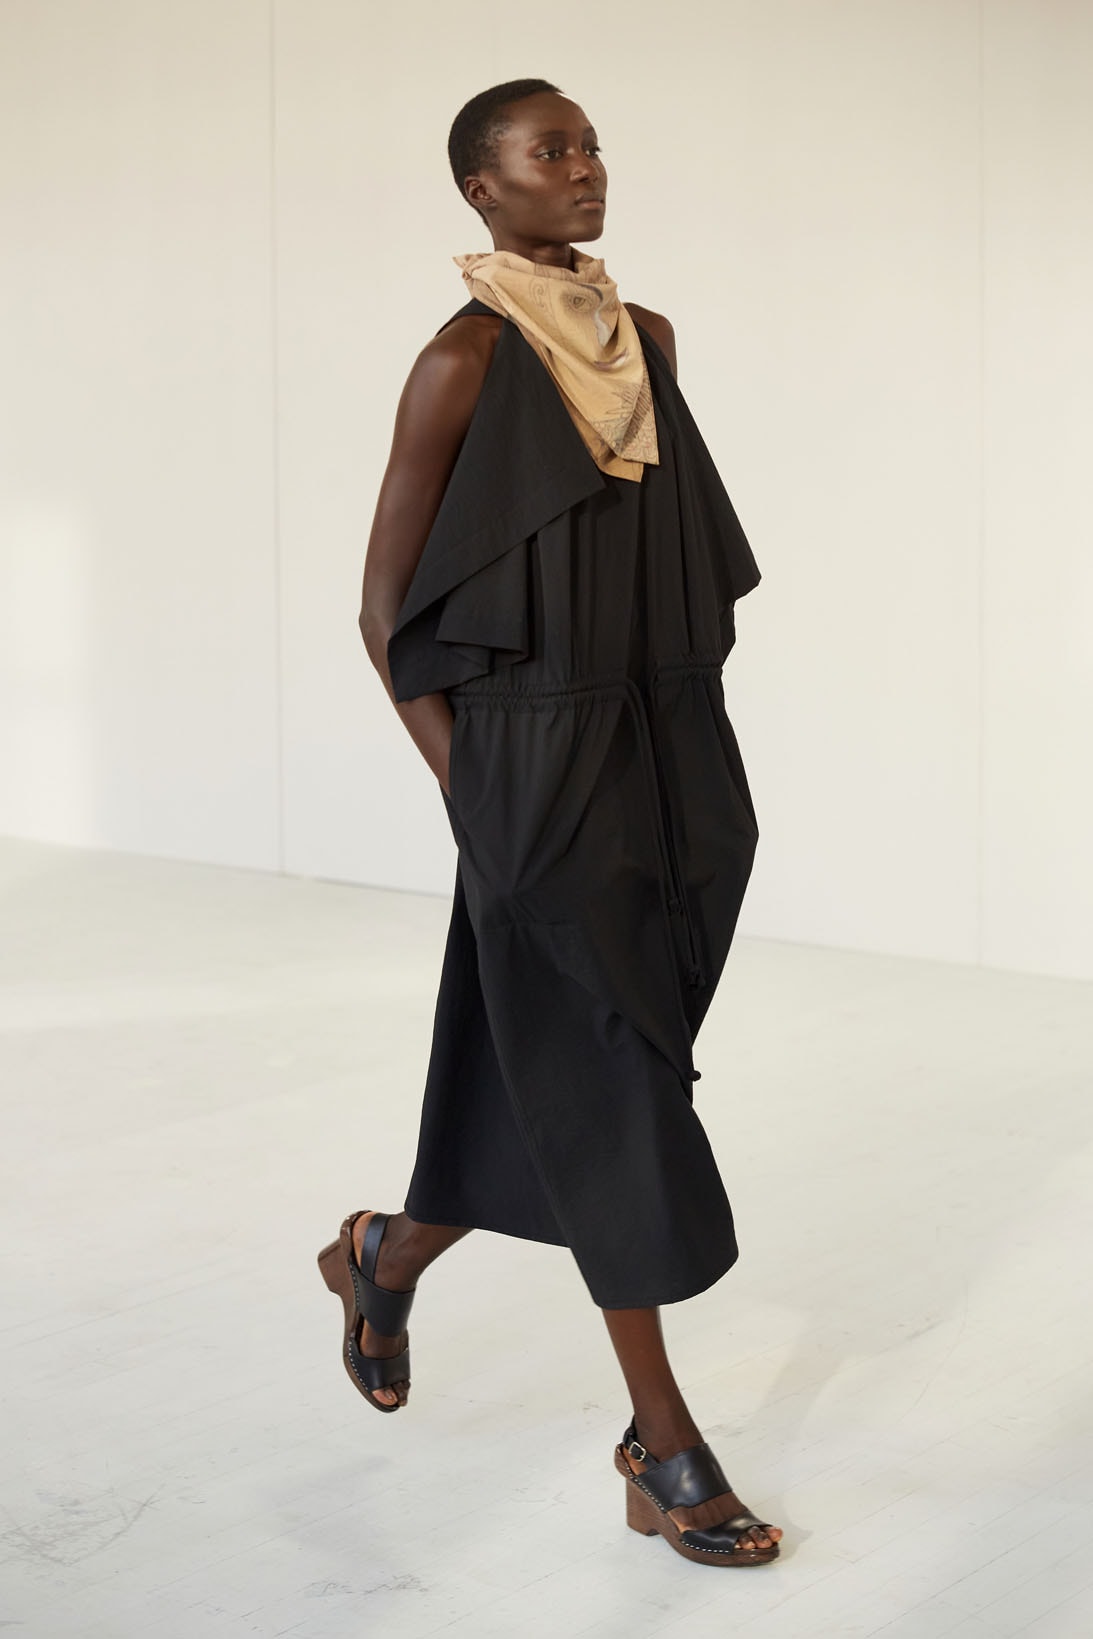 lemaire spring summer 2021 menswear collection co-ed runway announcement christophe sarah linh tran